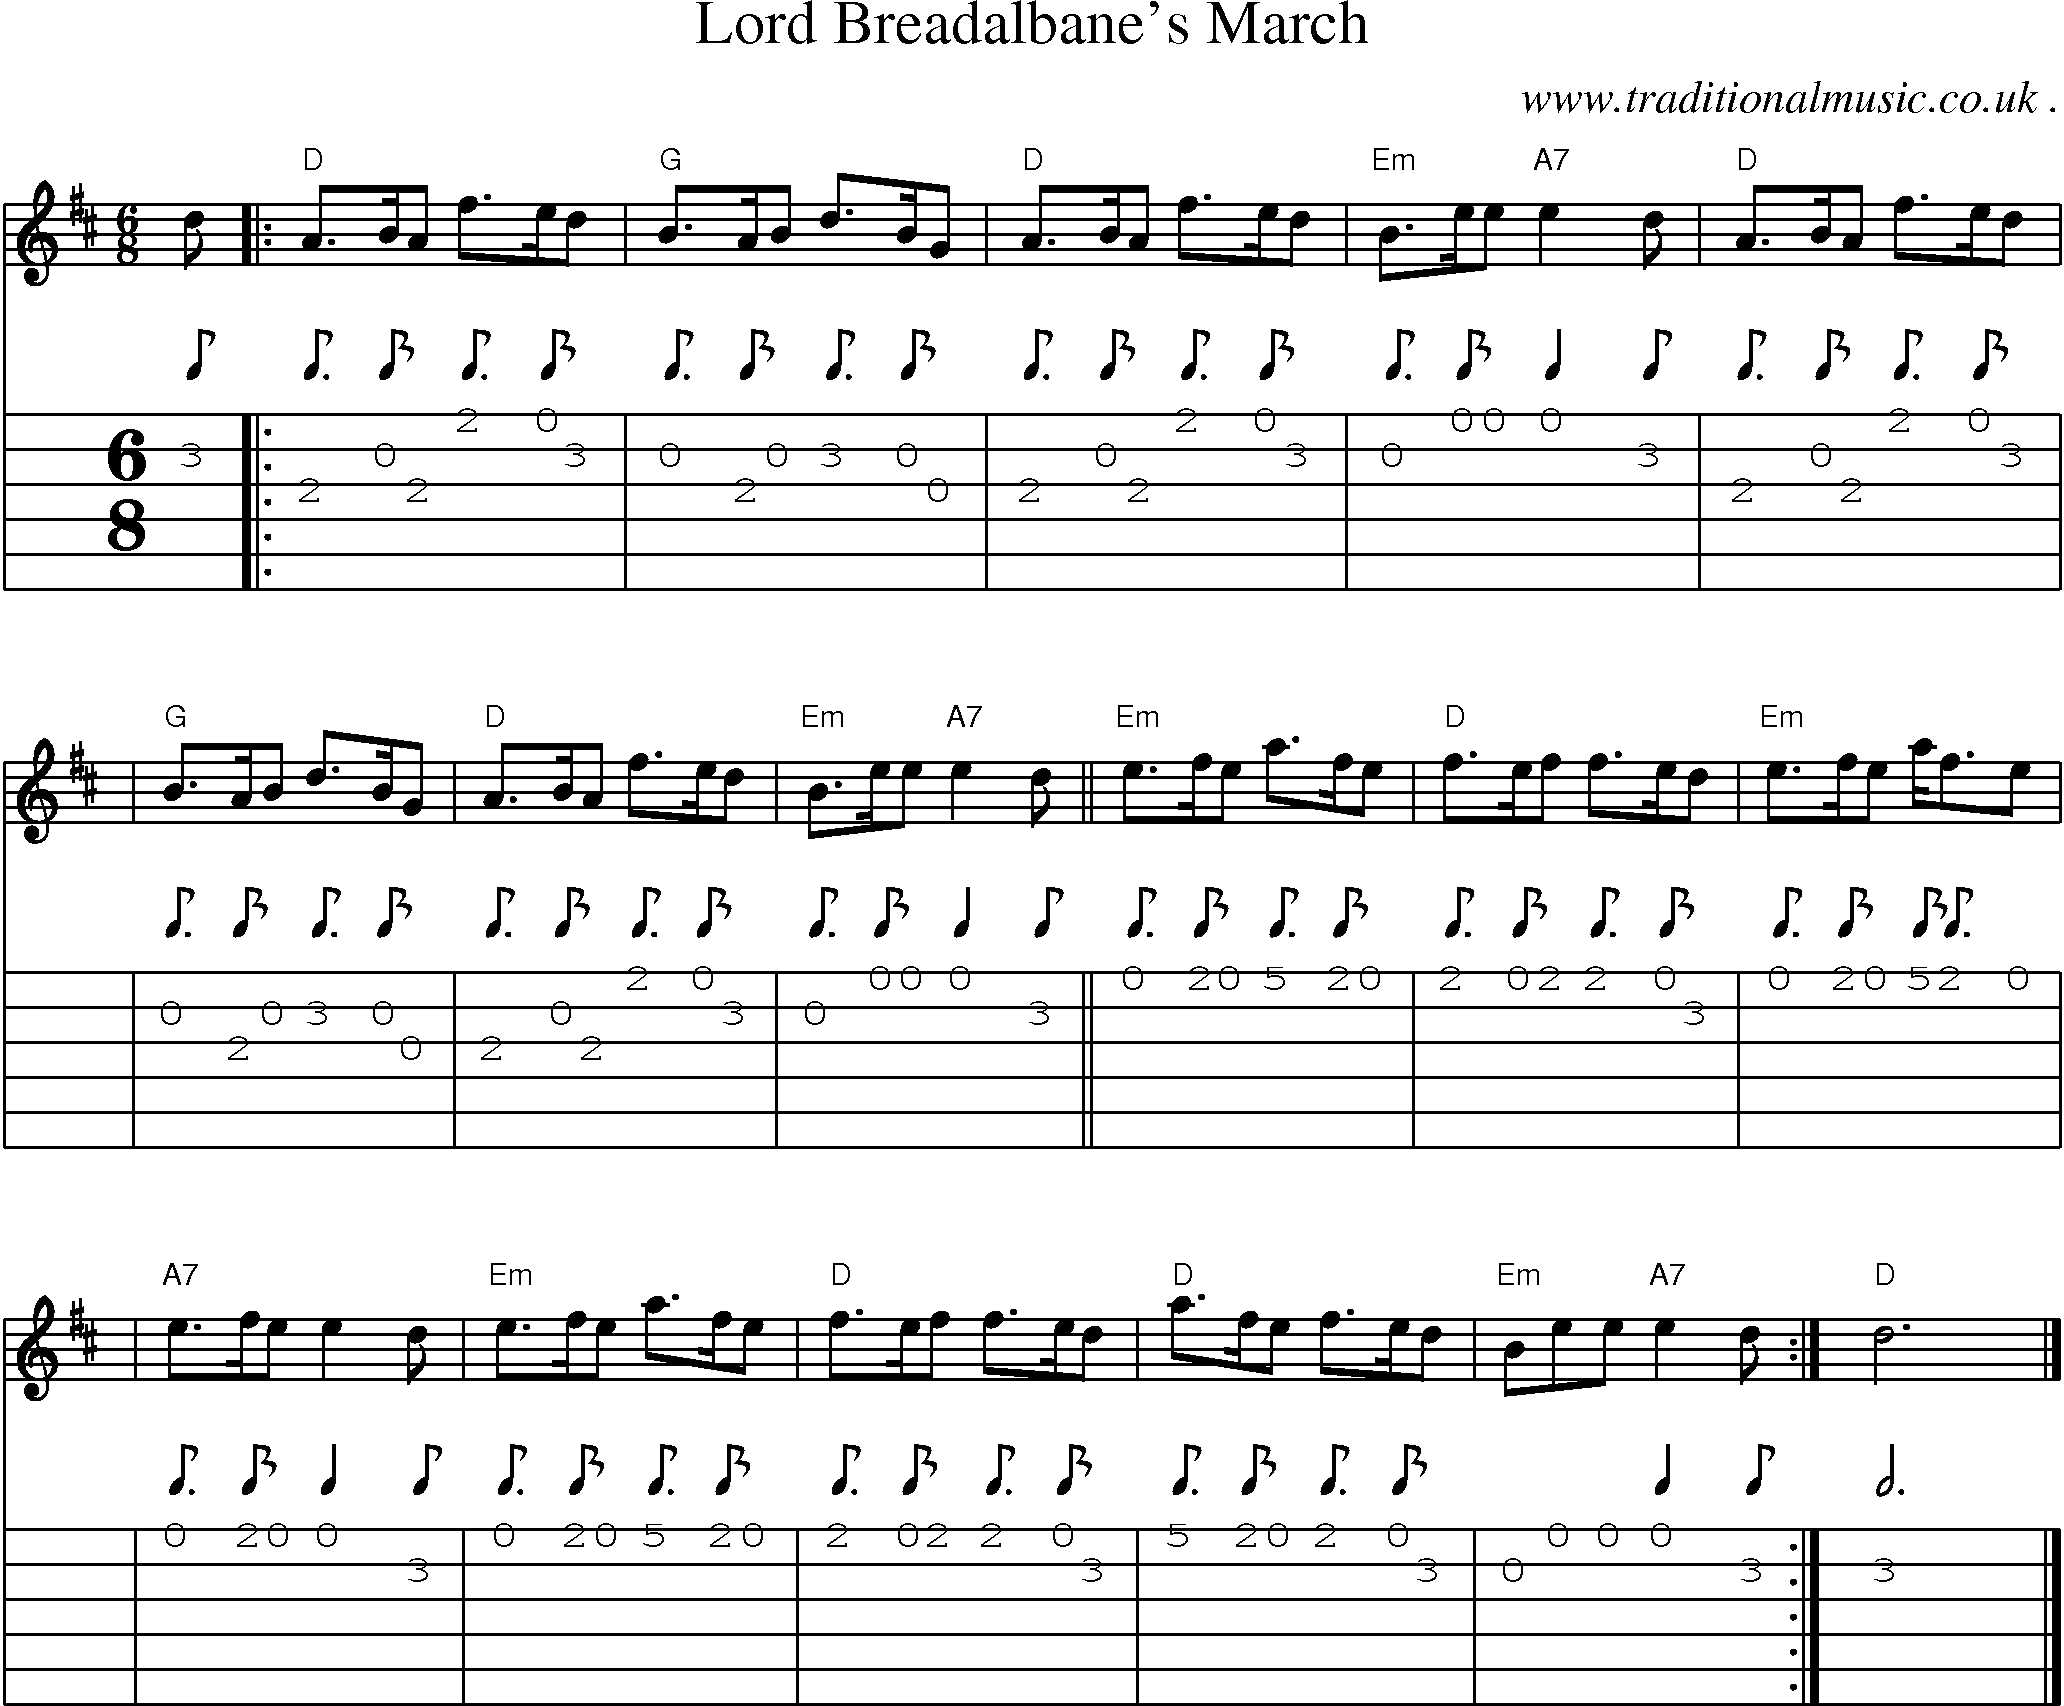 Sheet-music  score, Chords and Guitar Tabs for Lord Breadalbanes March